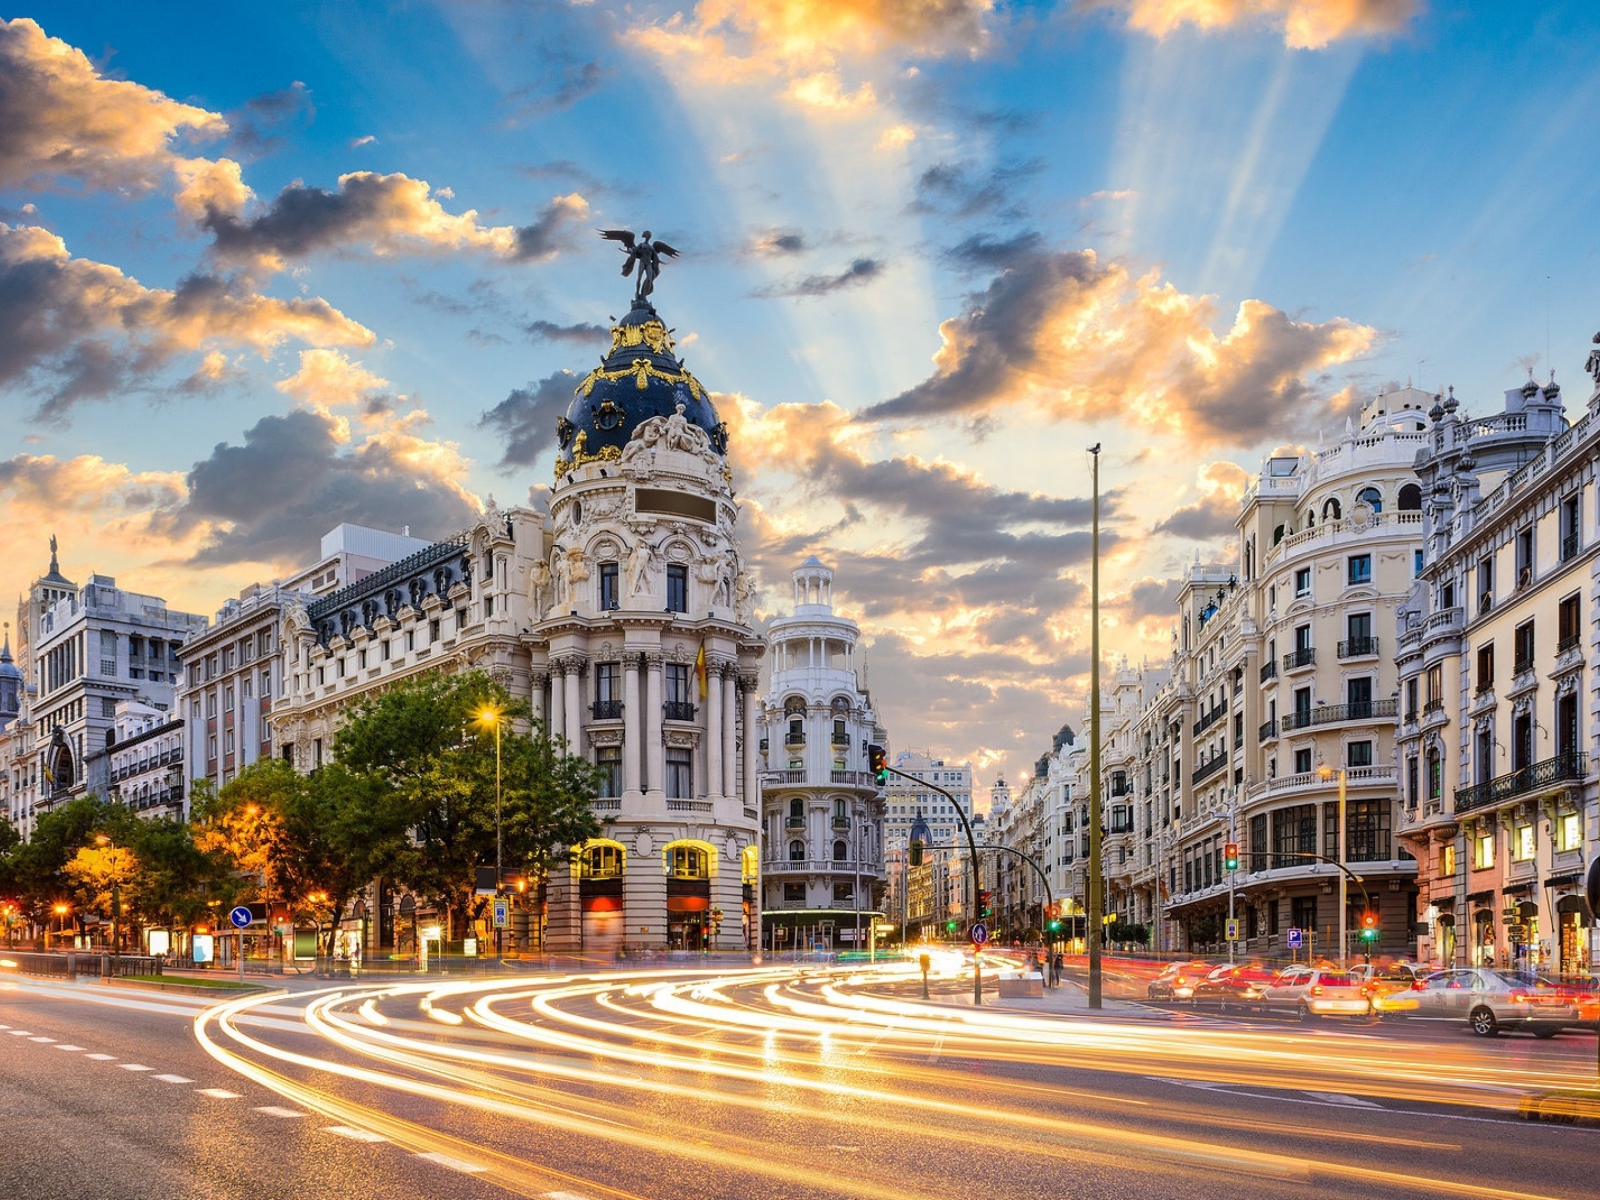 Ancient architecture on the Gran Via street, Madrid. Spain